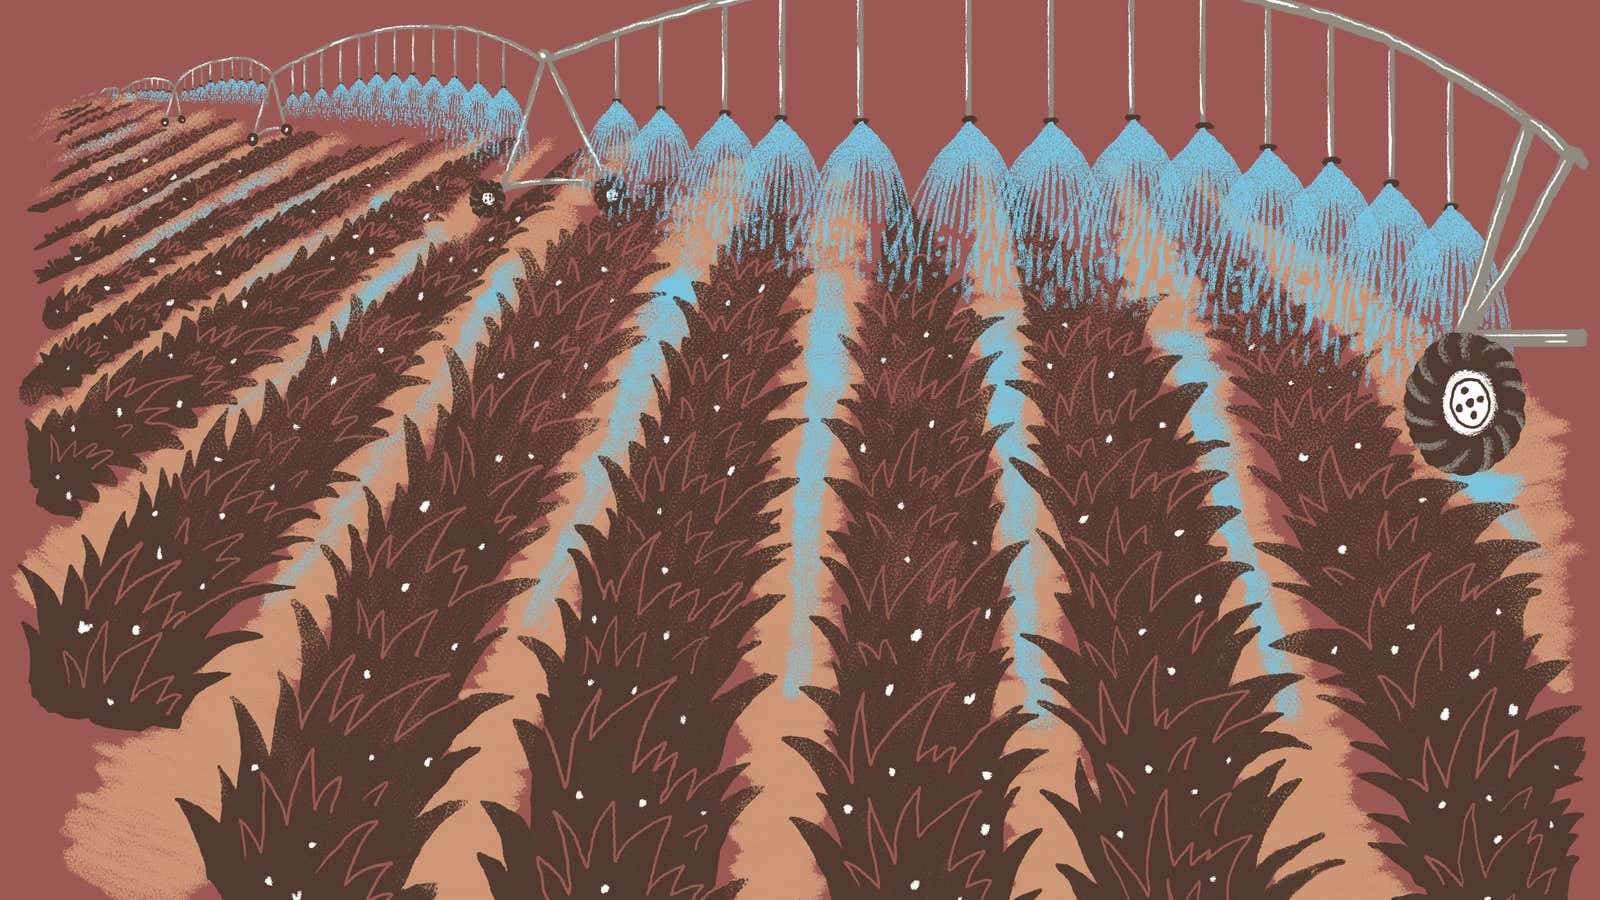 Illustration of irrigated fields in South Texas.